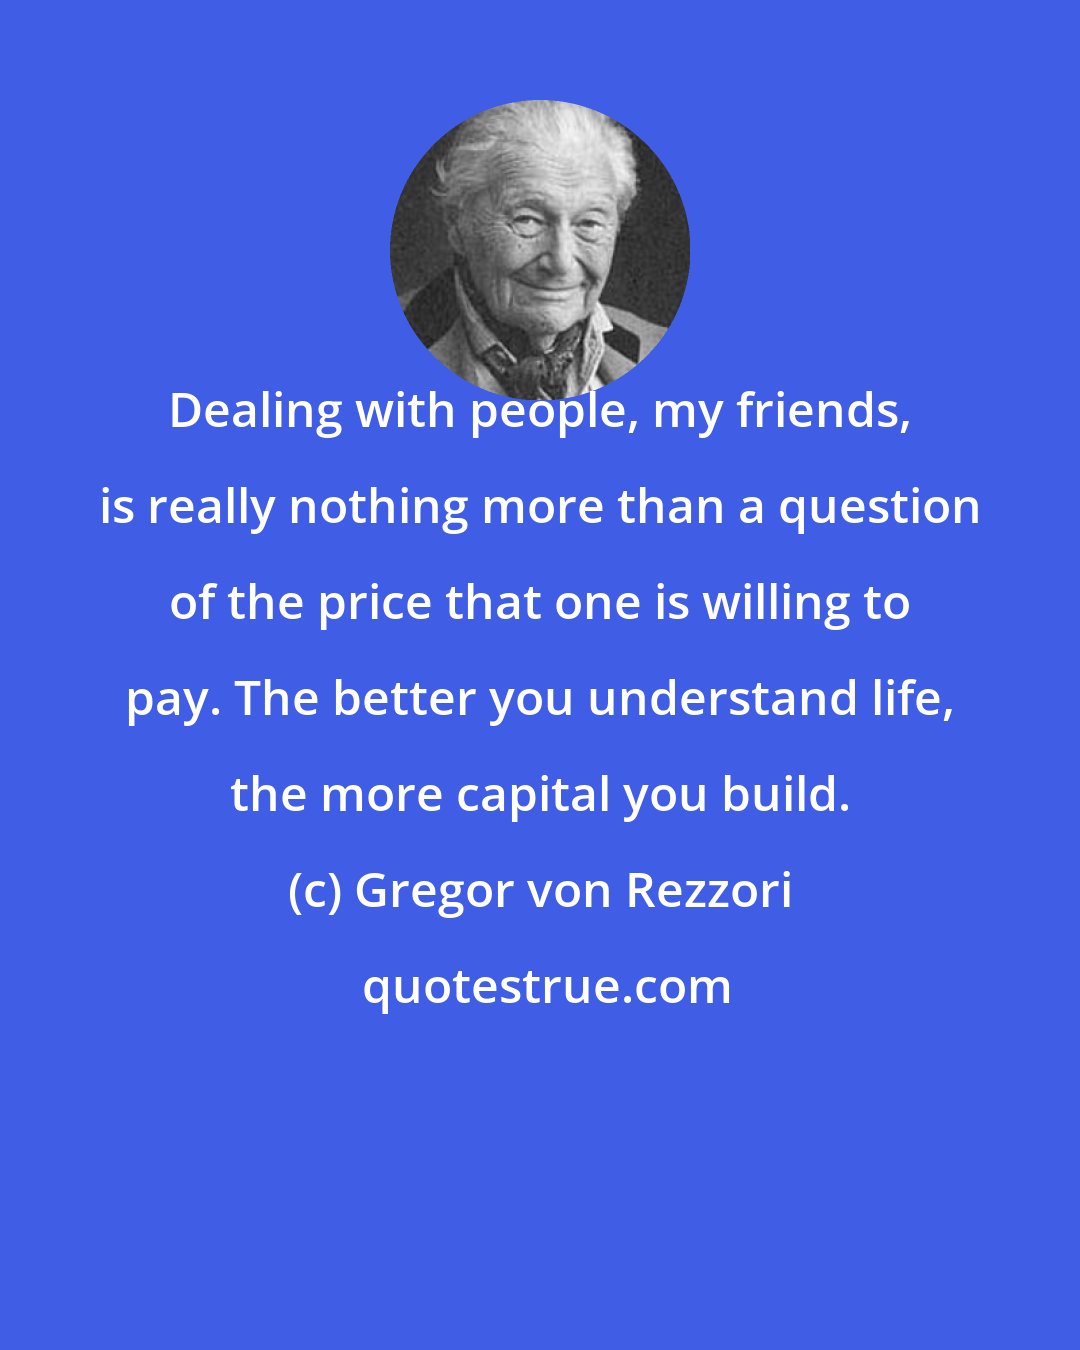 Gregor von Rezzori: Dealing with people, my friends, is really nothing more than a question of the price that one is willing to pay. The better you understand life, the more capital you build.